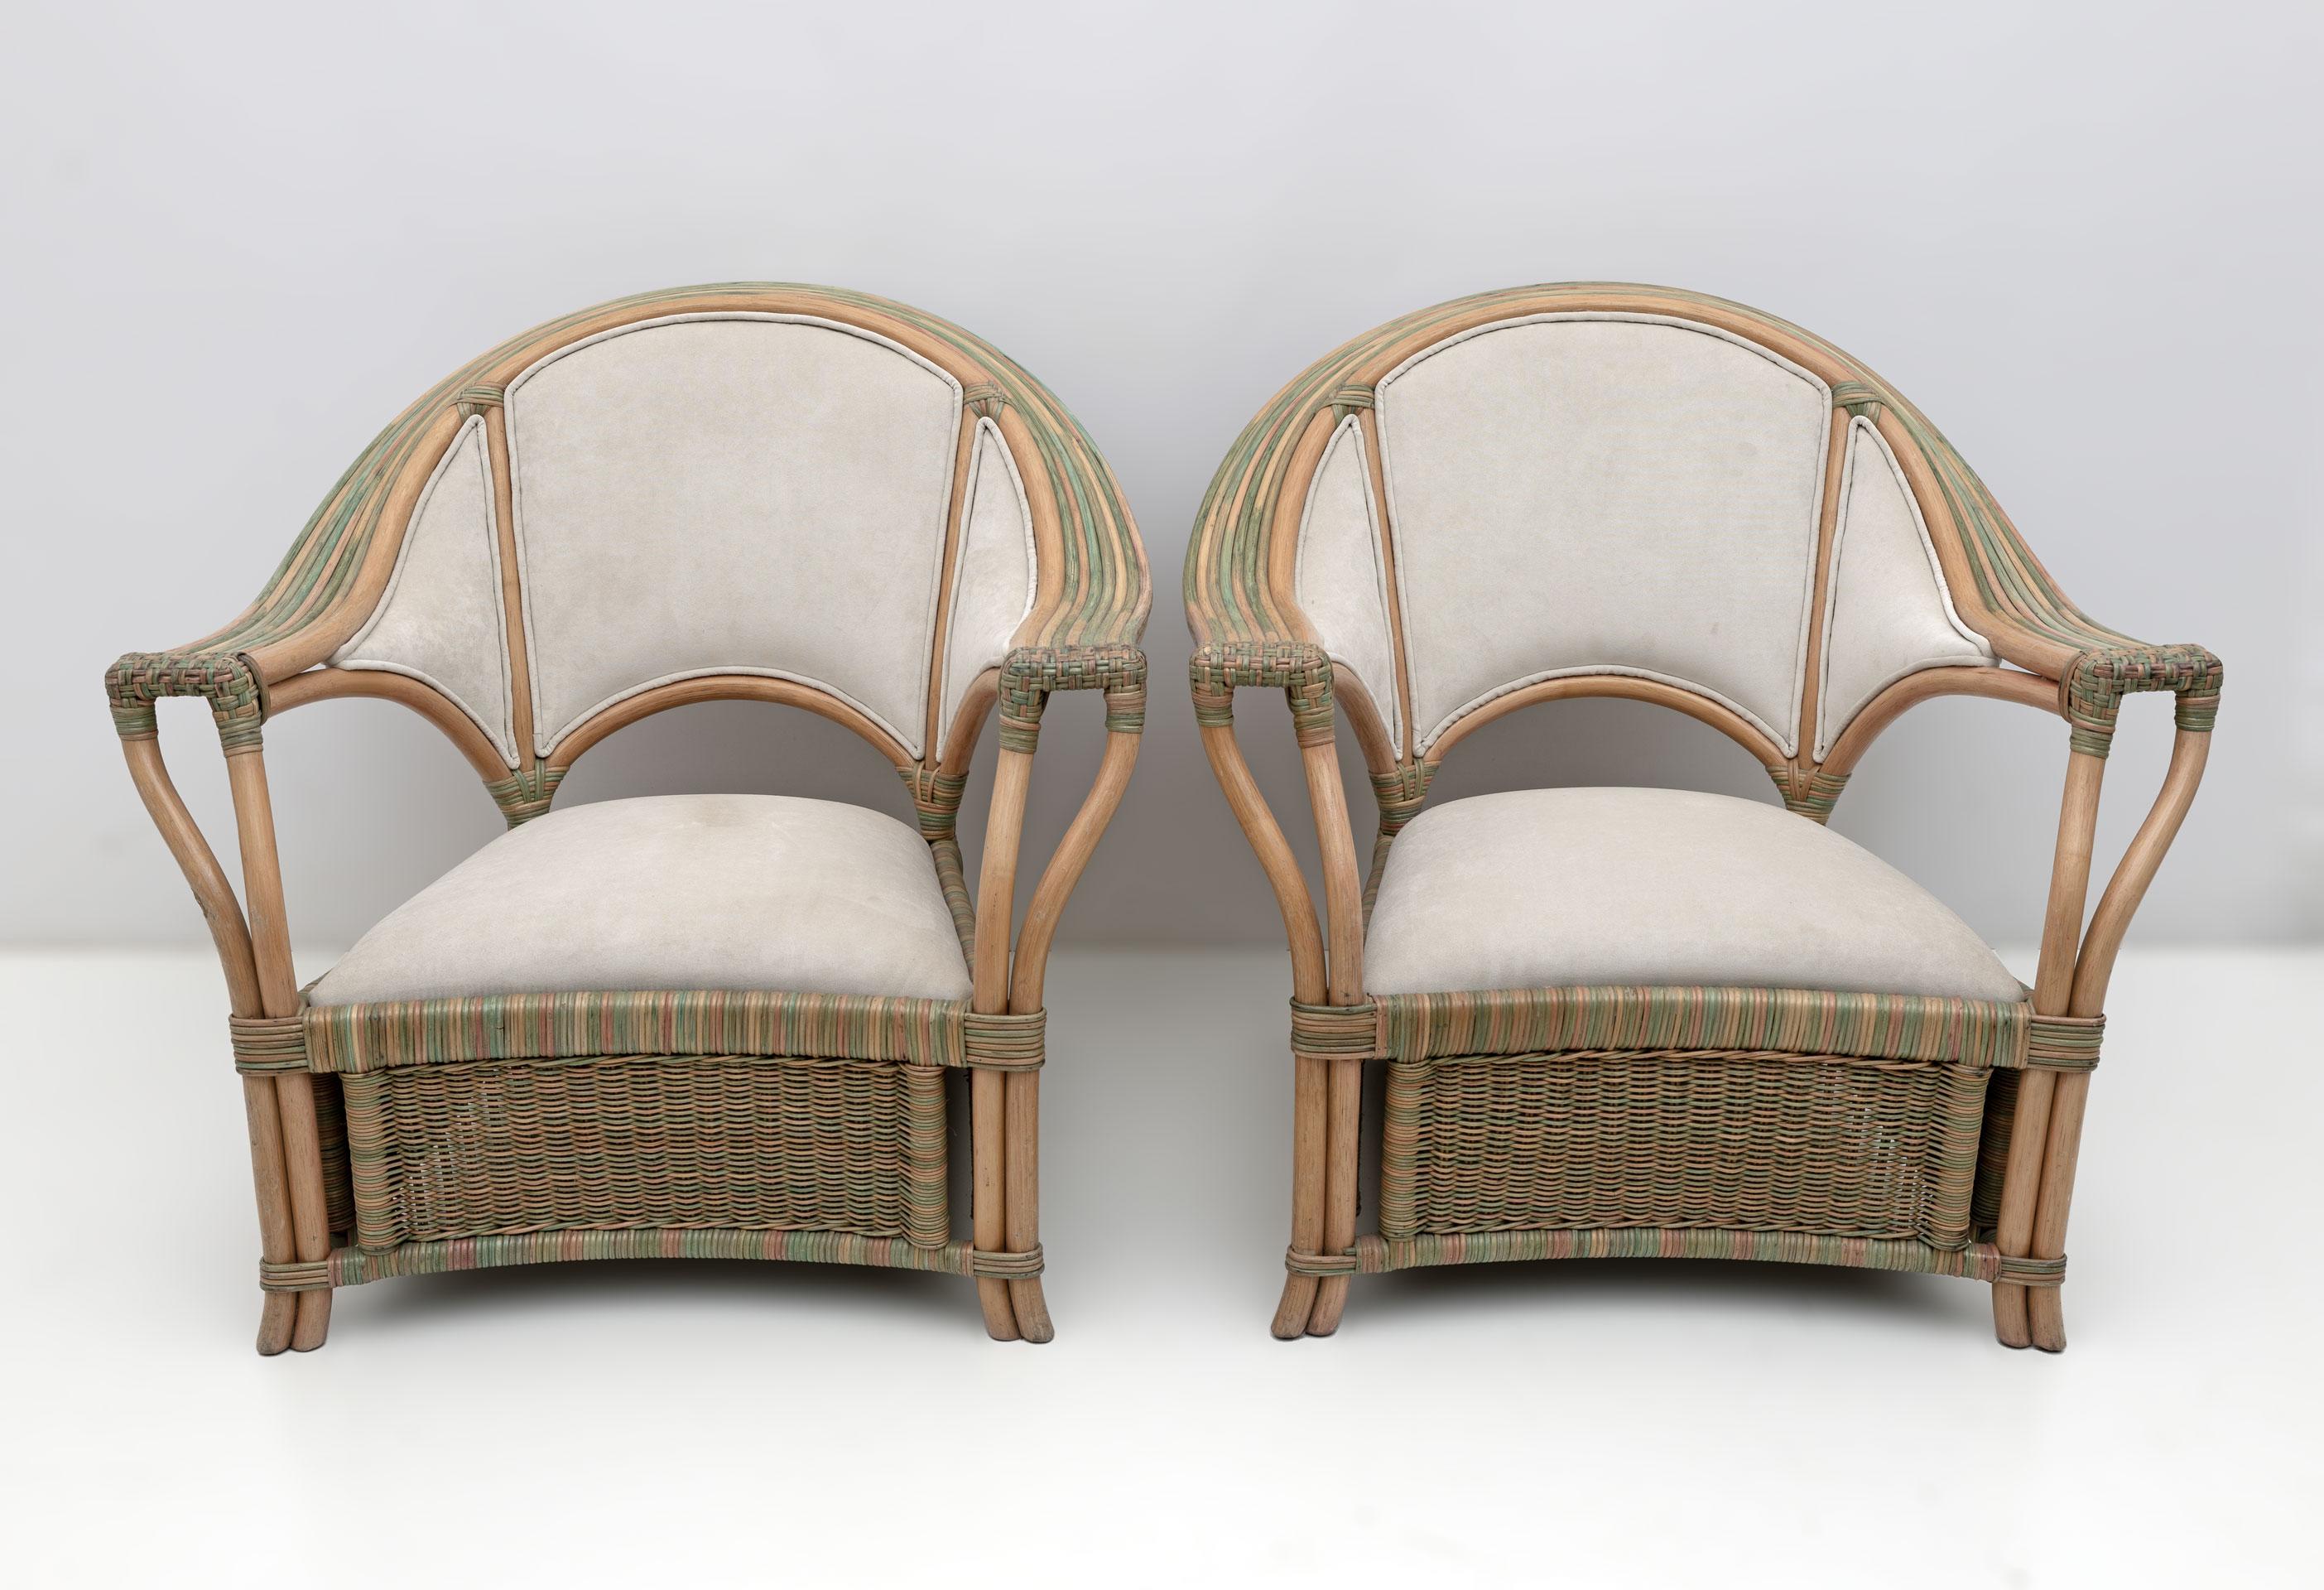 Fabric Pair of Mid-century Modern Italian Rattan and Wicker Armchairs, 1970s For Sale